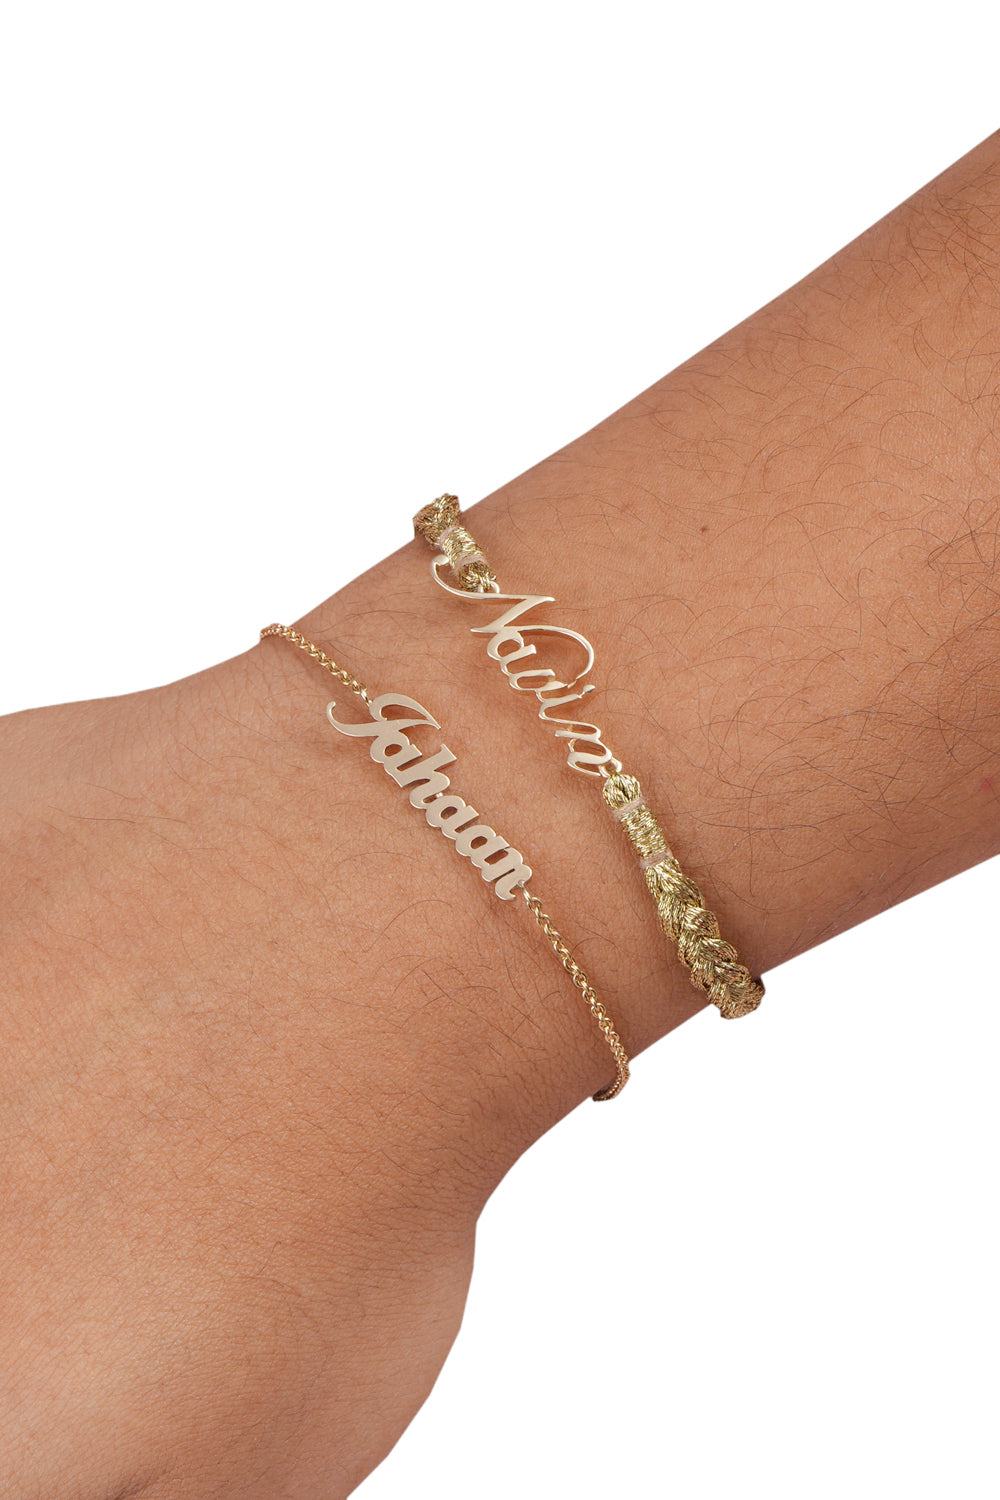 14KT Gold Personalised Name Chain Bracelet